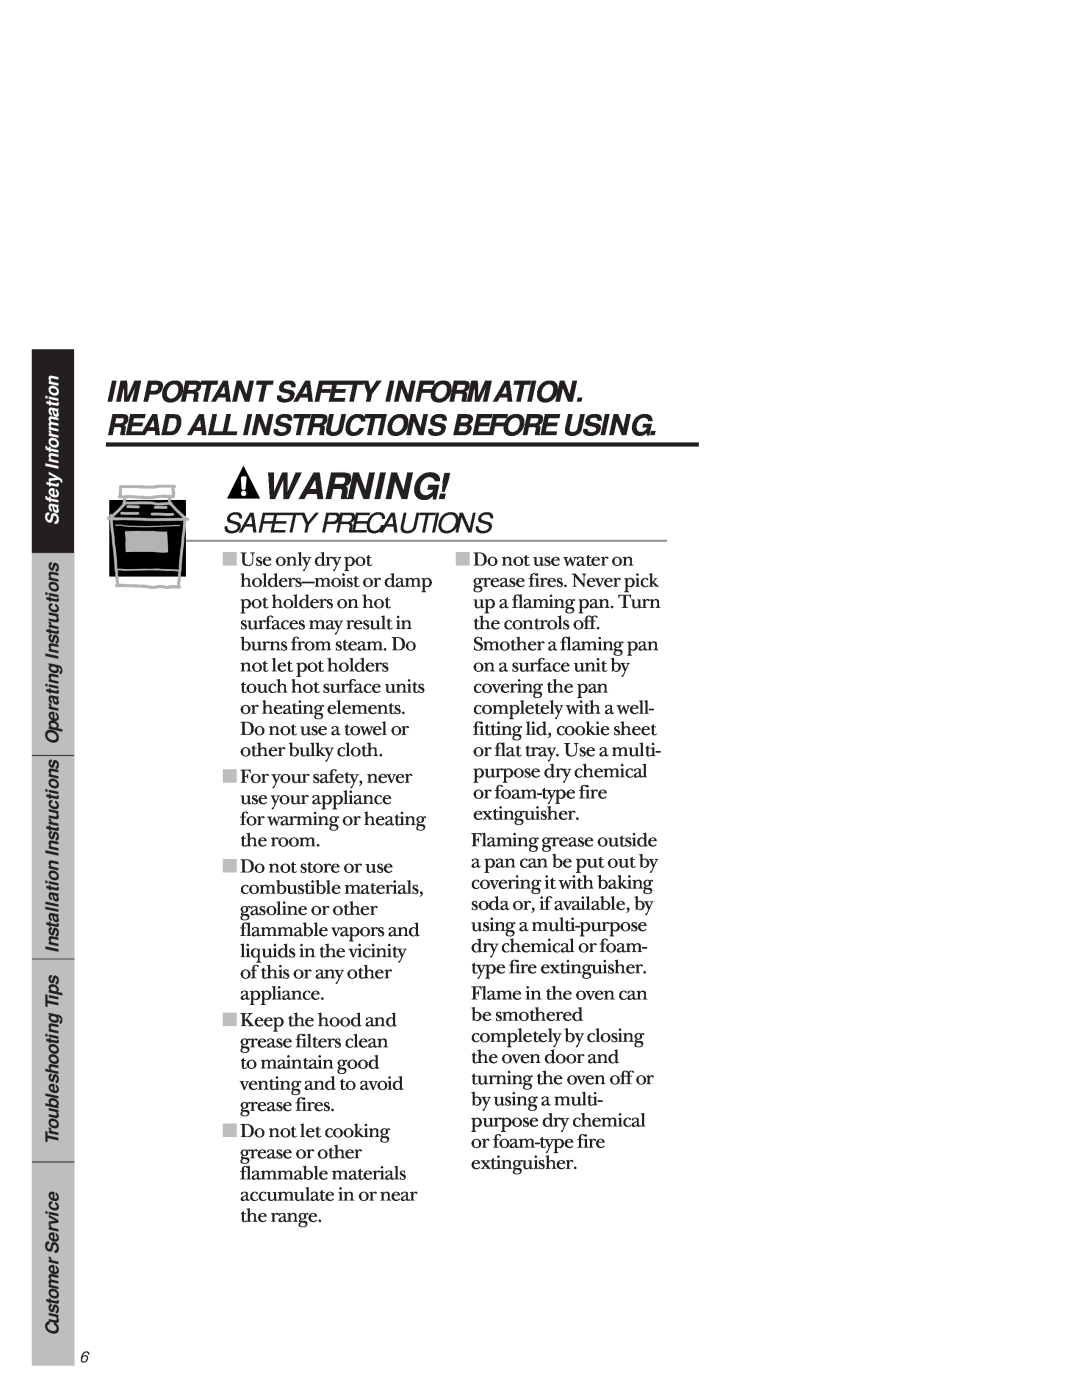 GE 49-8941, 164D3333P171 Safety Precautions, Important Safety Information. Read All Instructions Before Using 